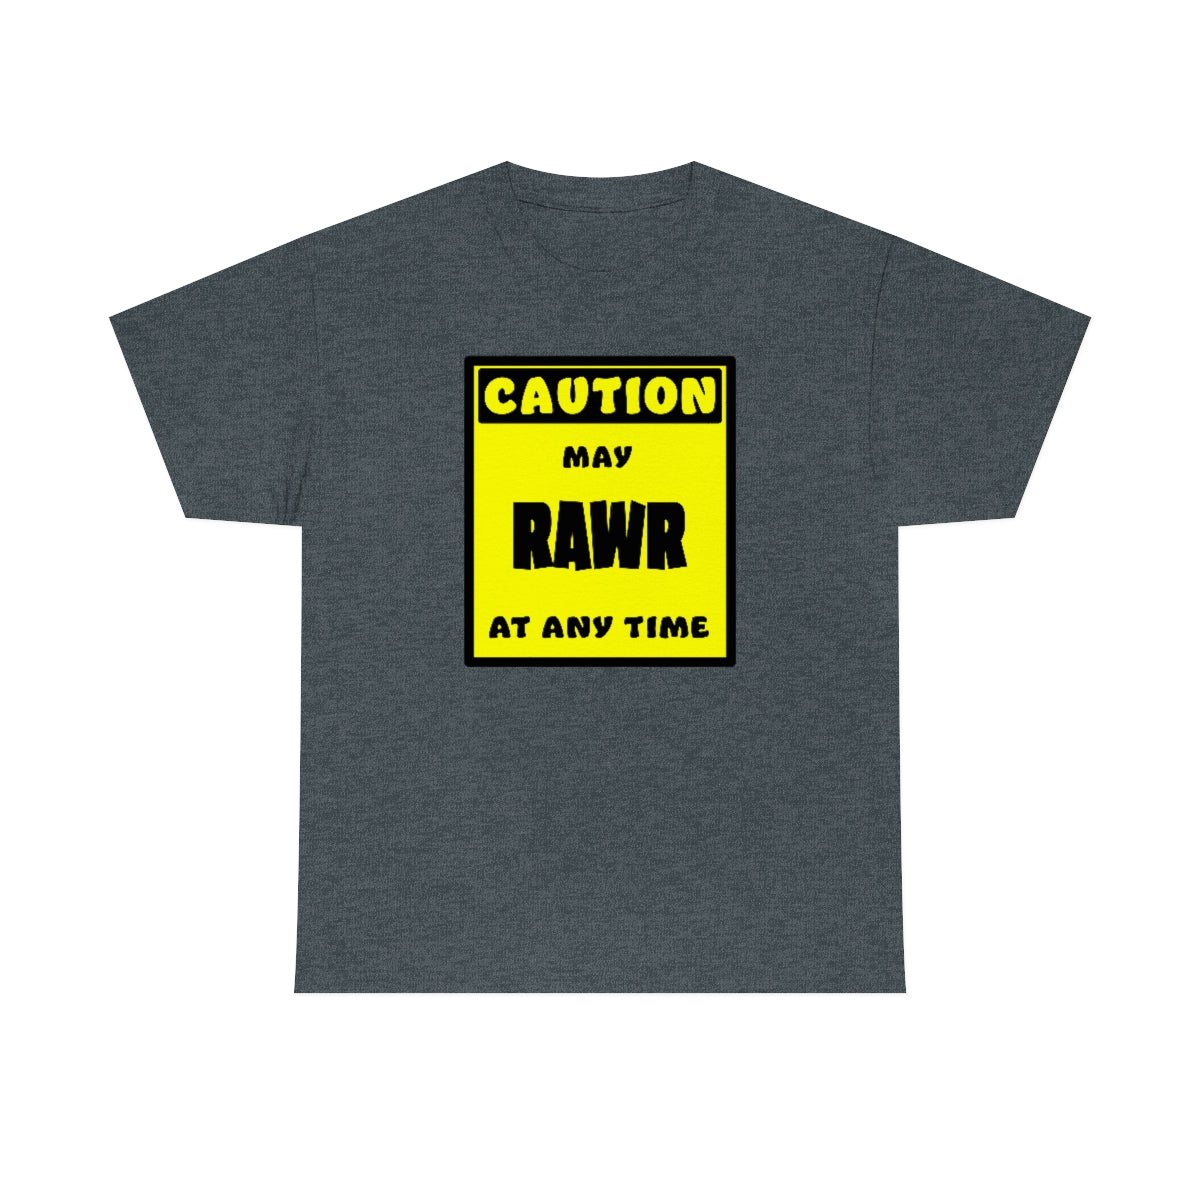 CAUTION! May RAWR at any time! - T-Shirt T-Shirt Artworktee Dark Heather S 